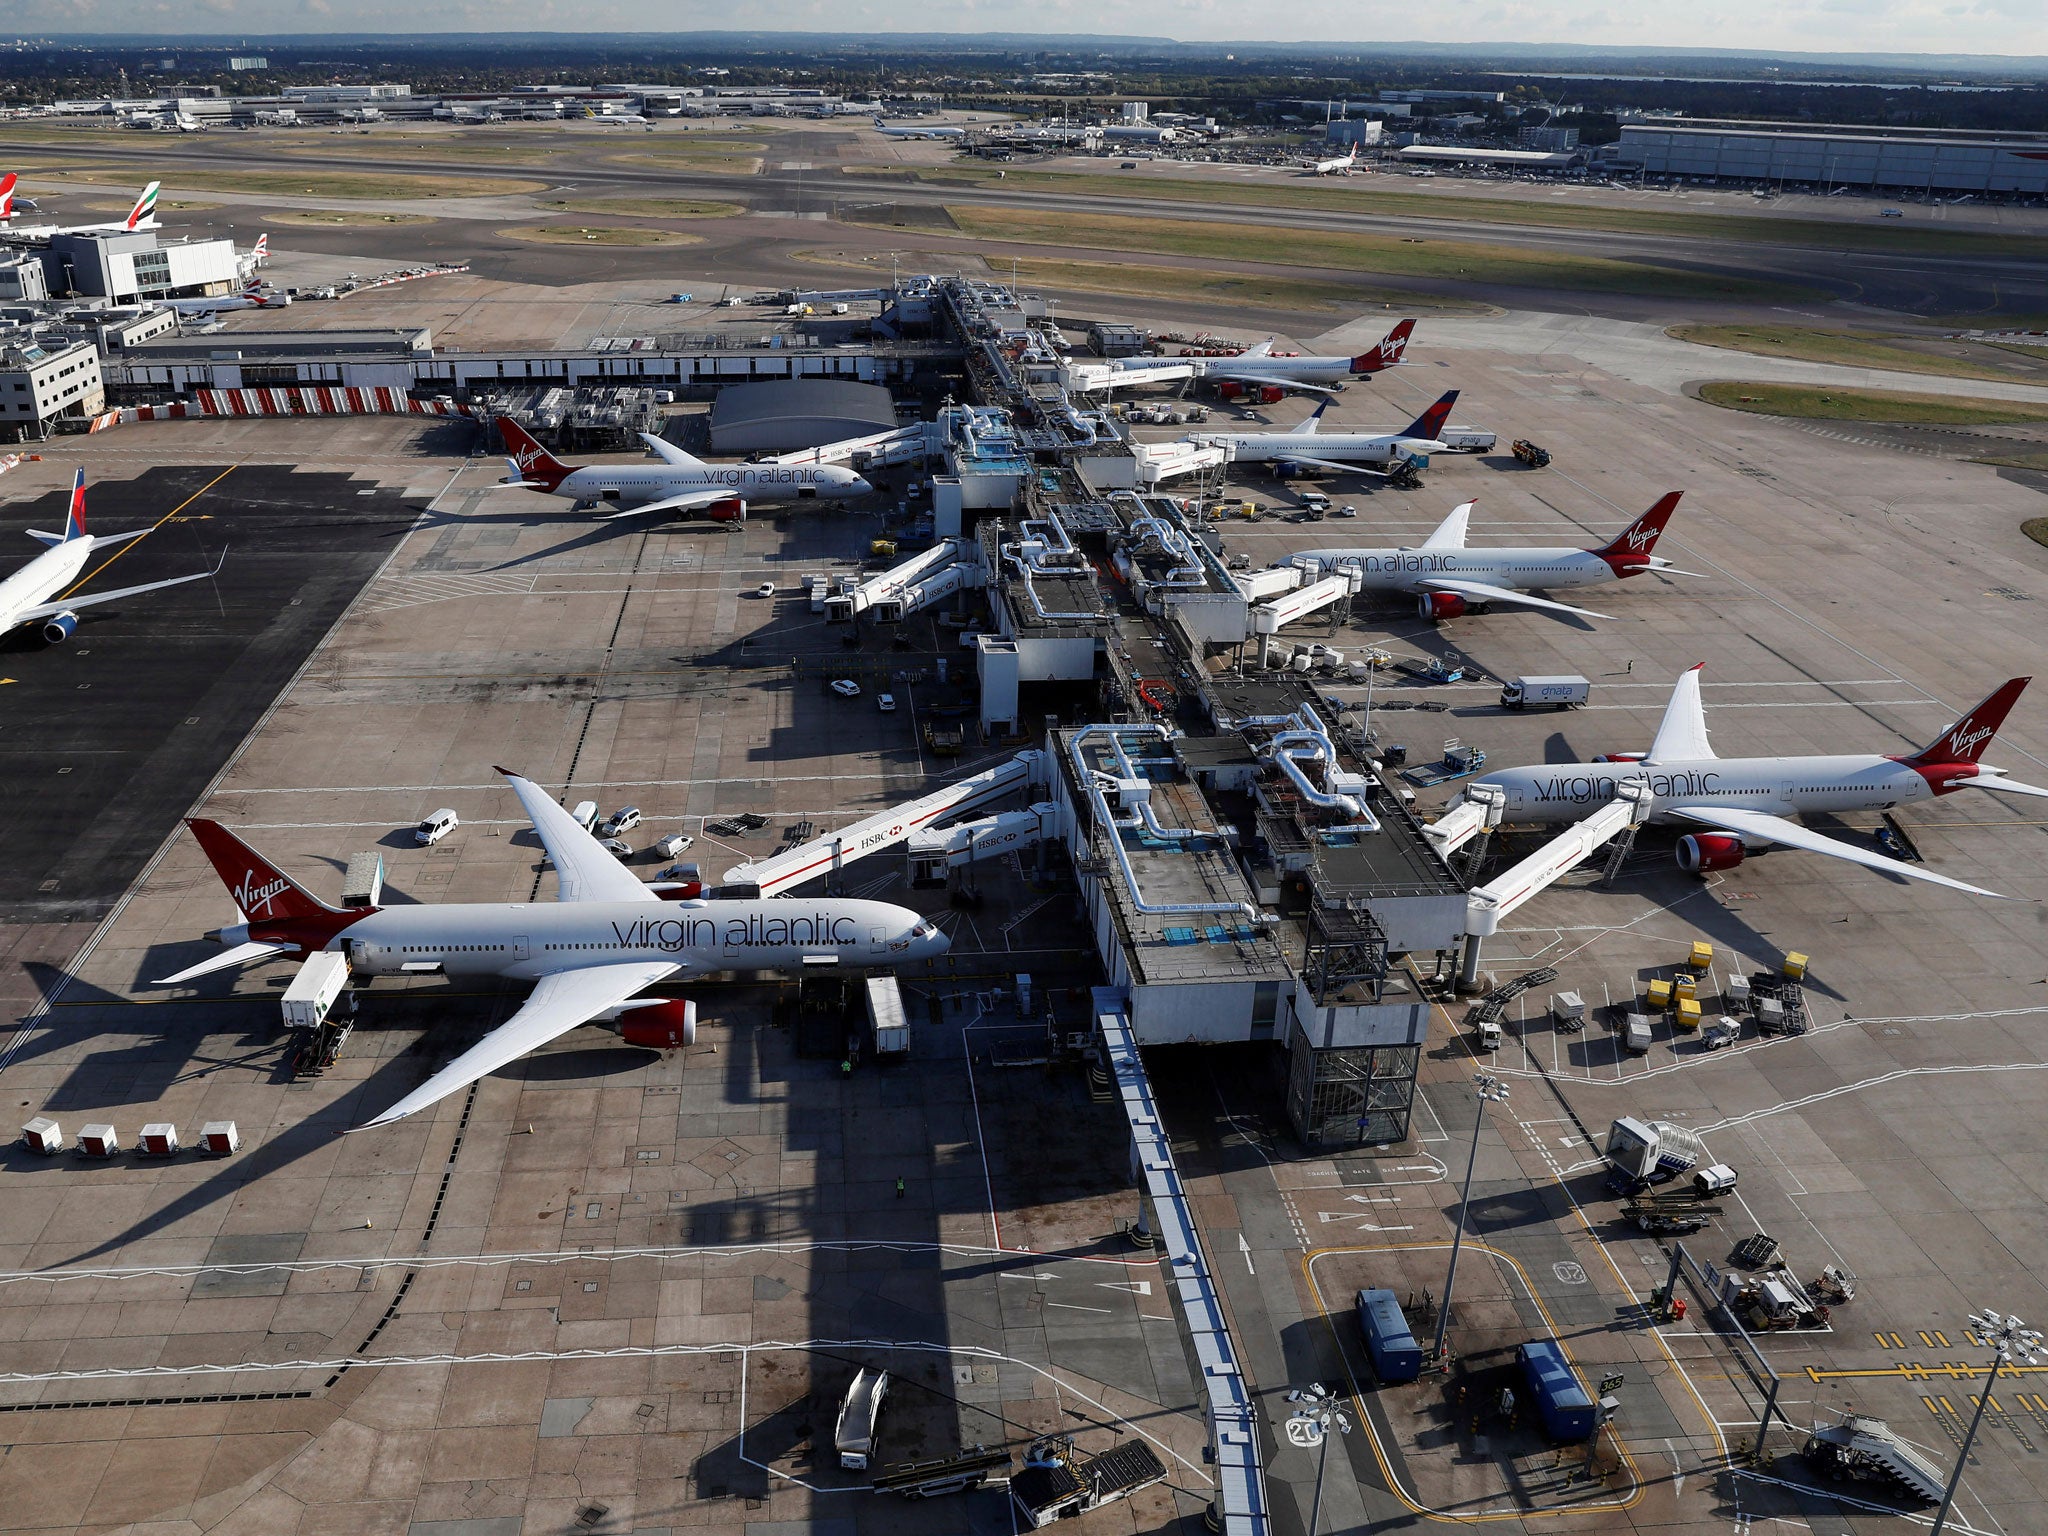 Heathrow Suspends All Terminal 3 Departures Due To Airport